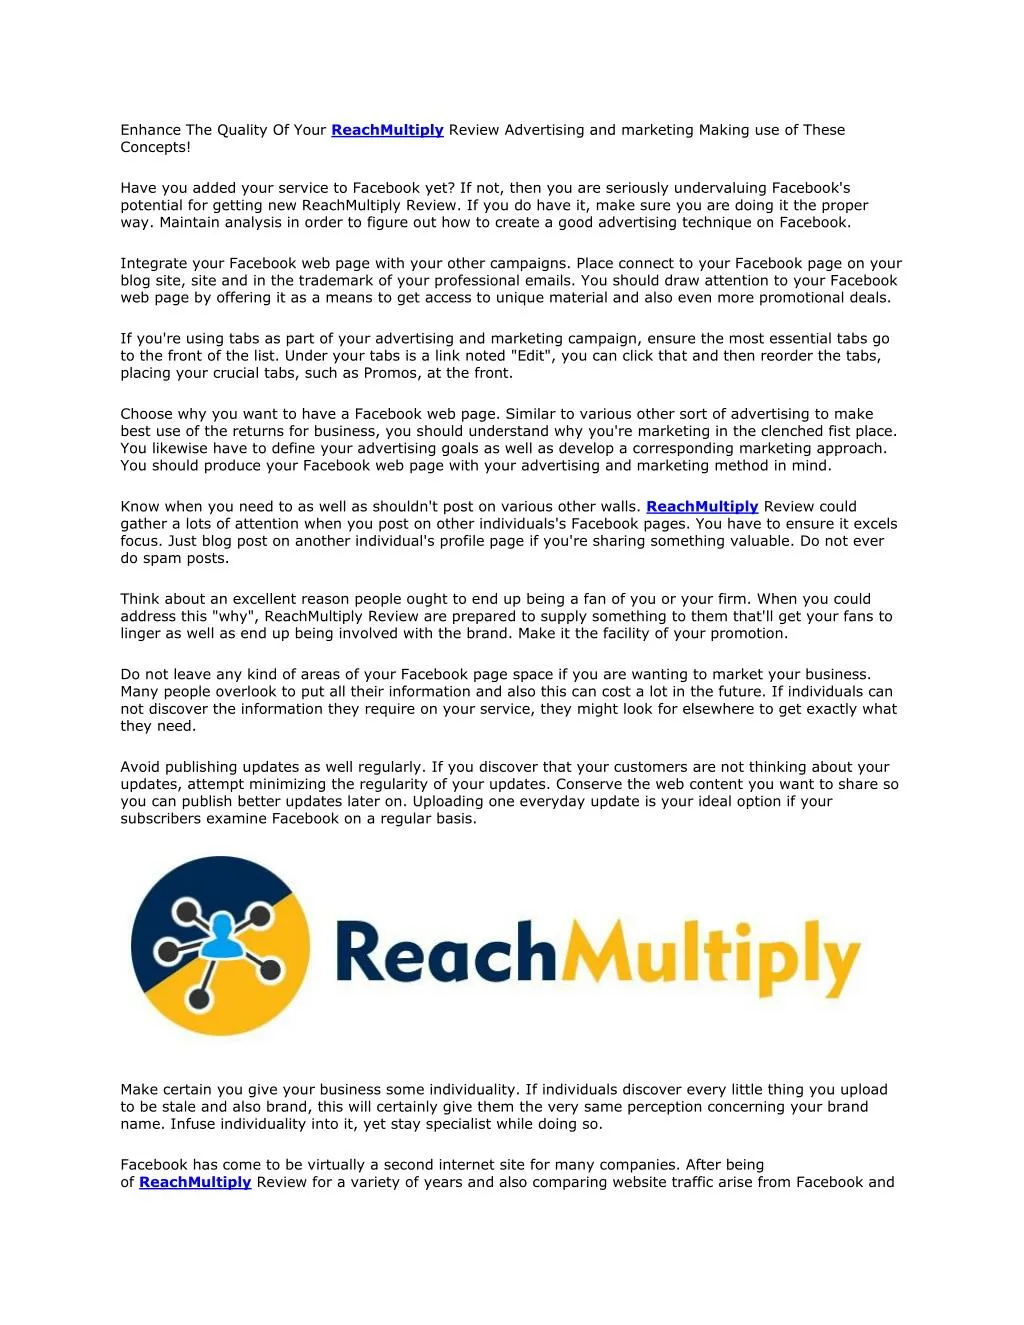 enhance the quality of your reachmultiply review